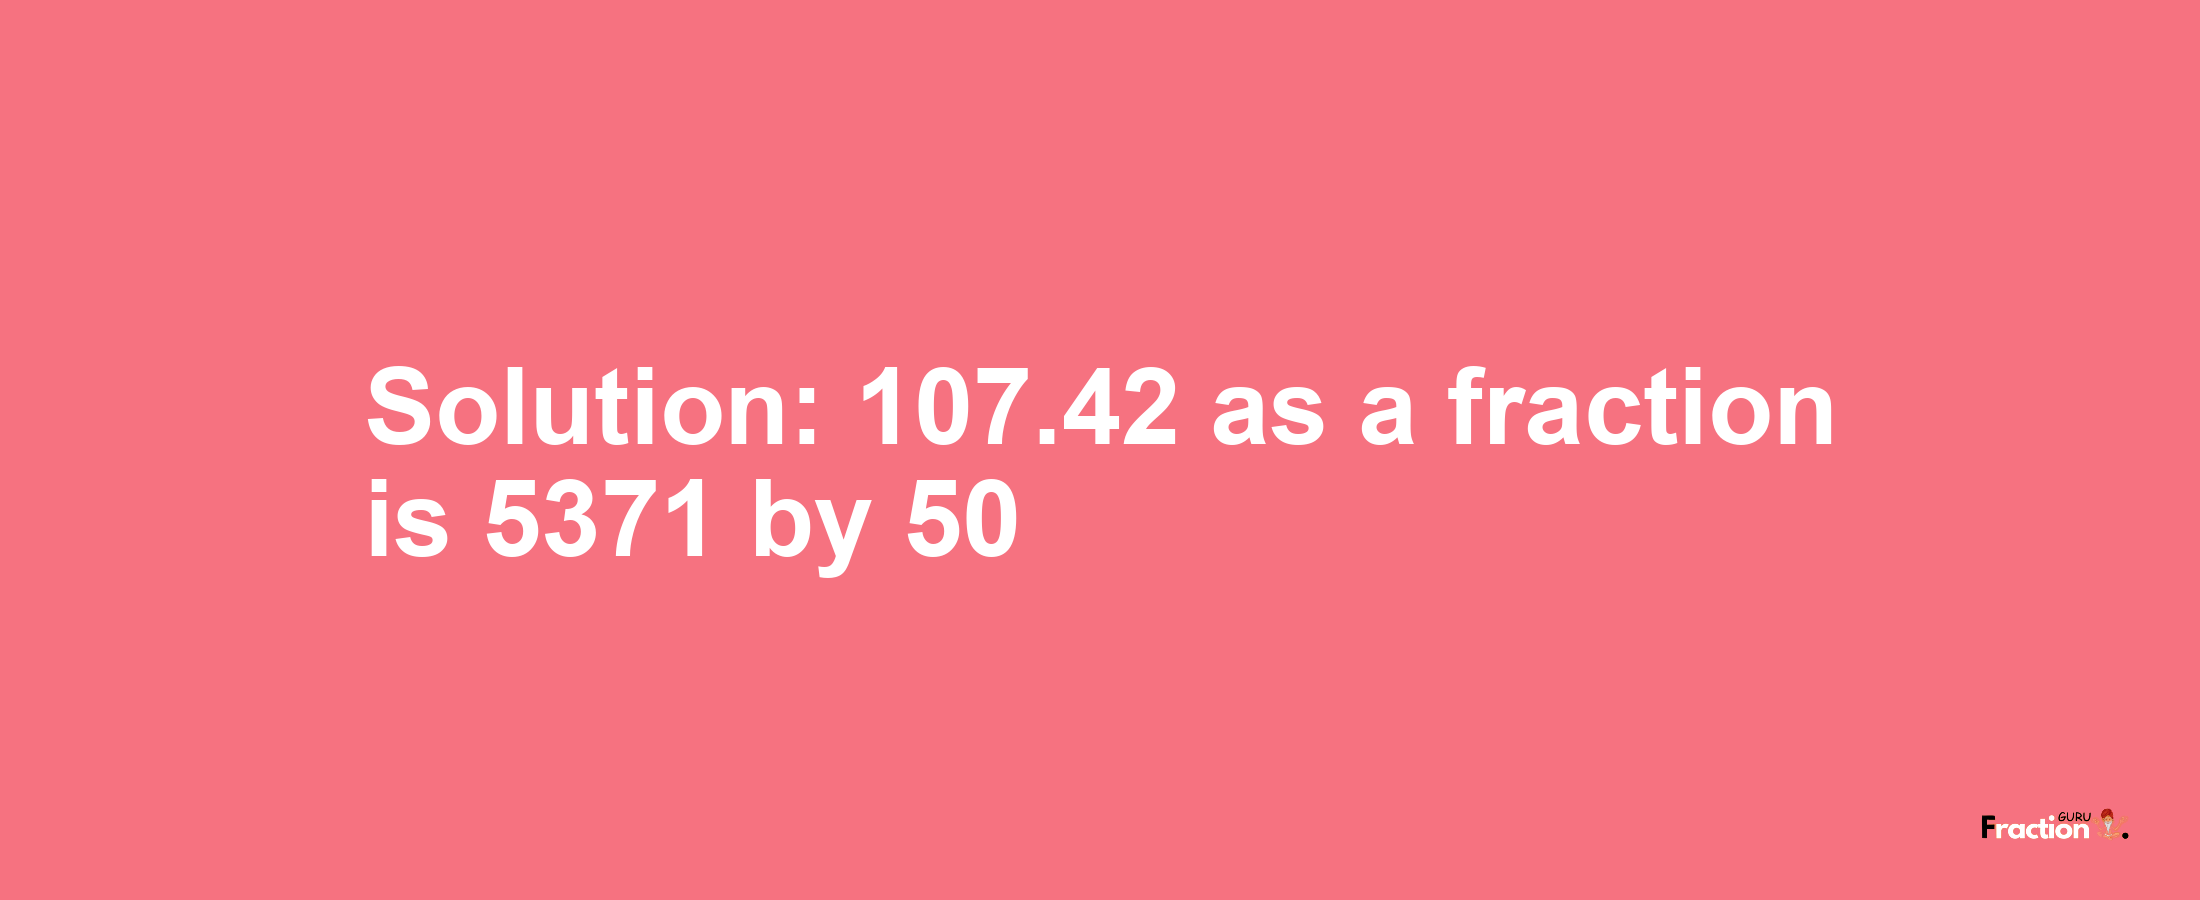 Solution:107.42 as a fraction is 5371/50